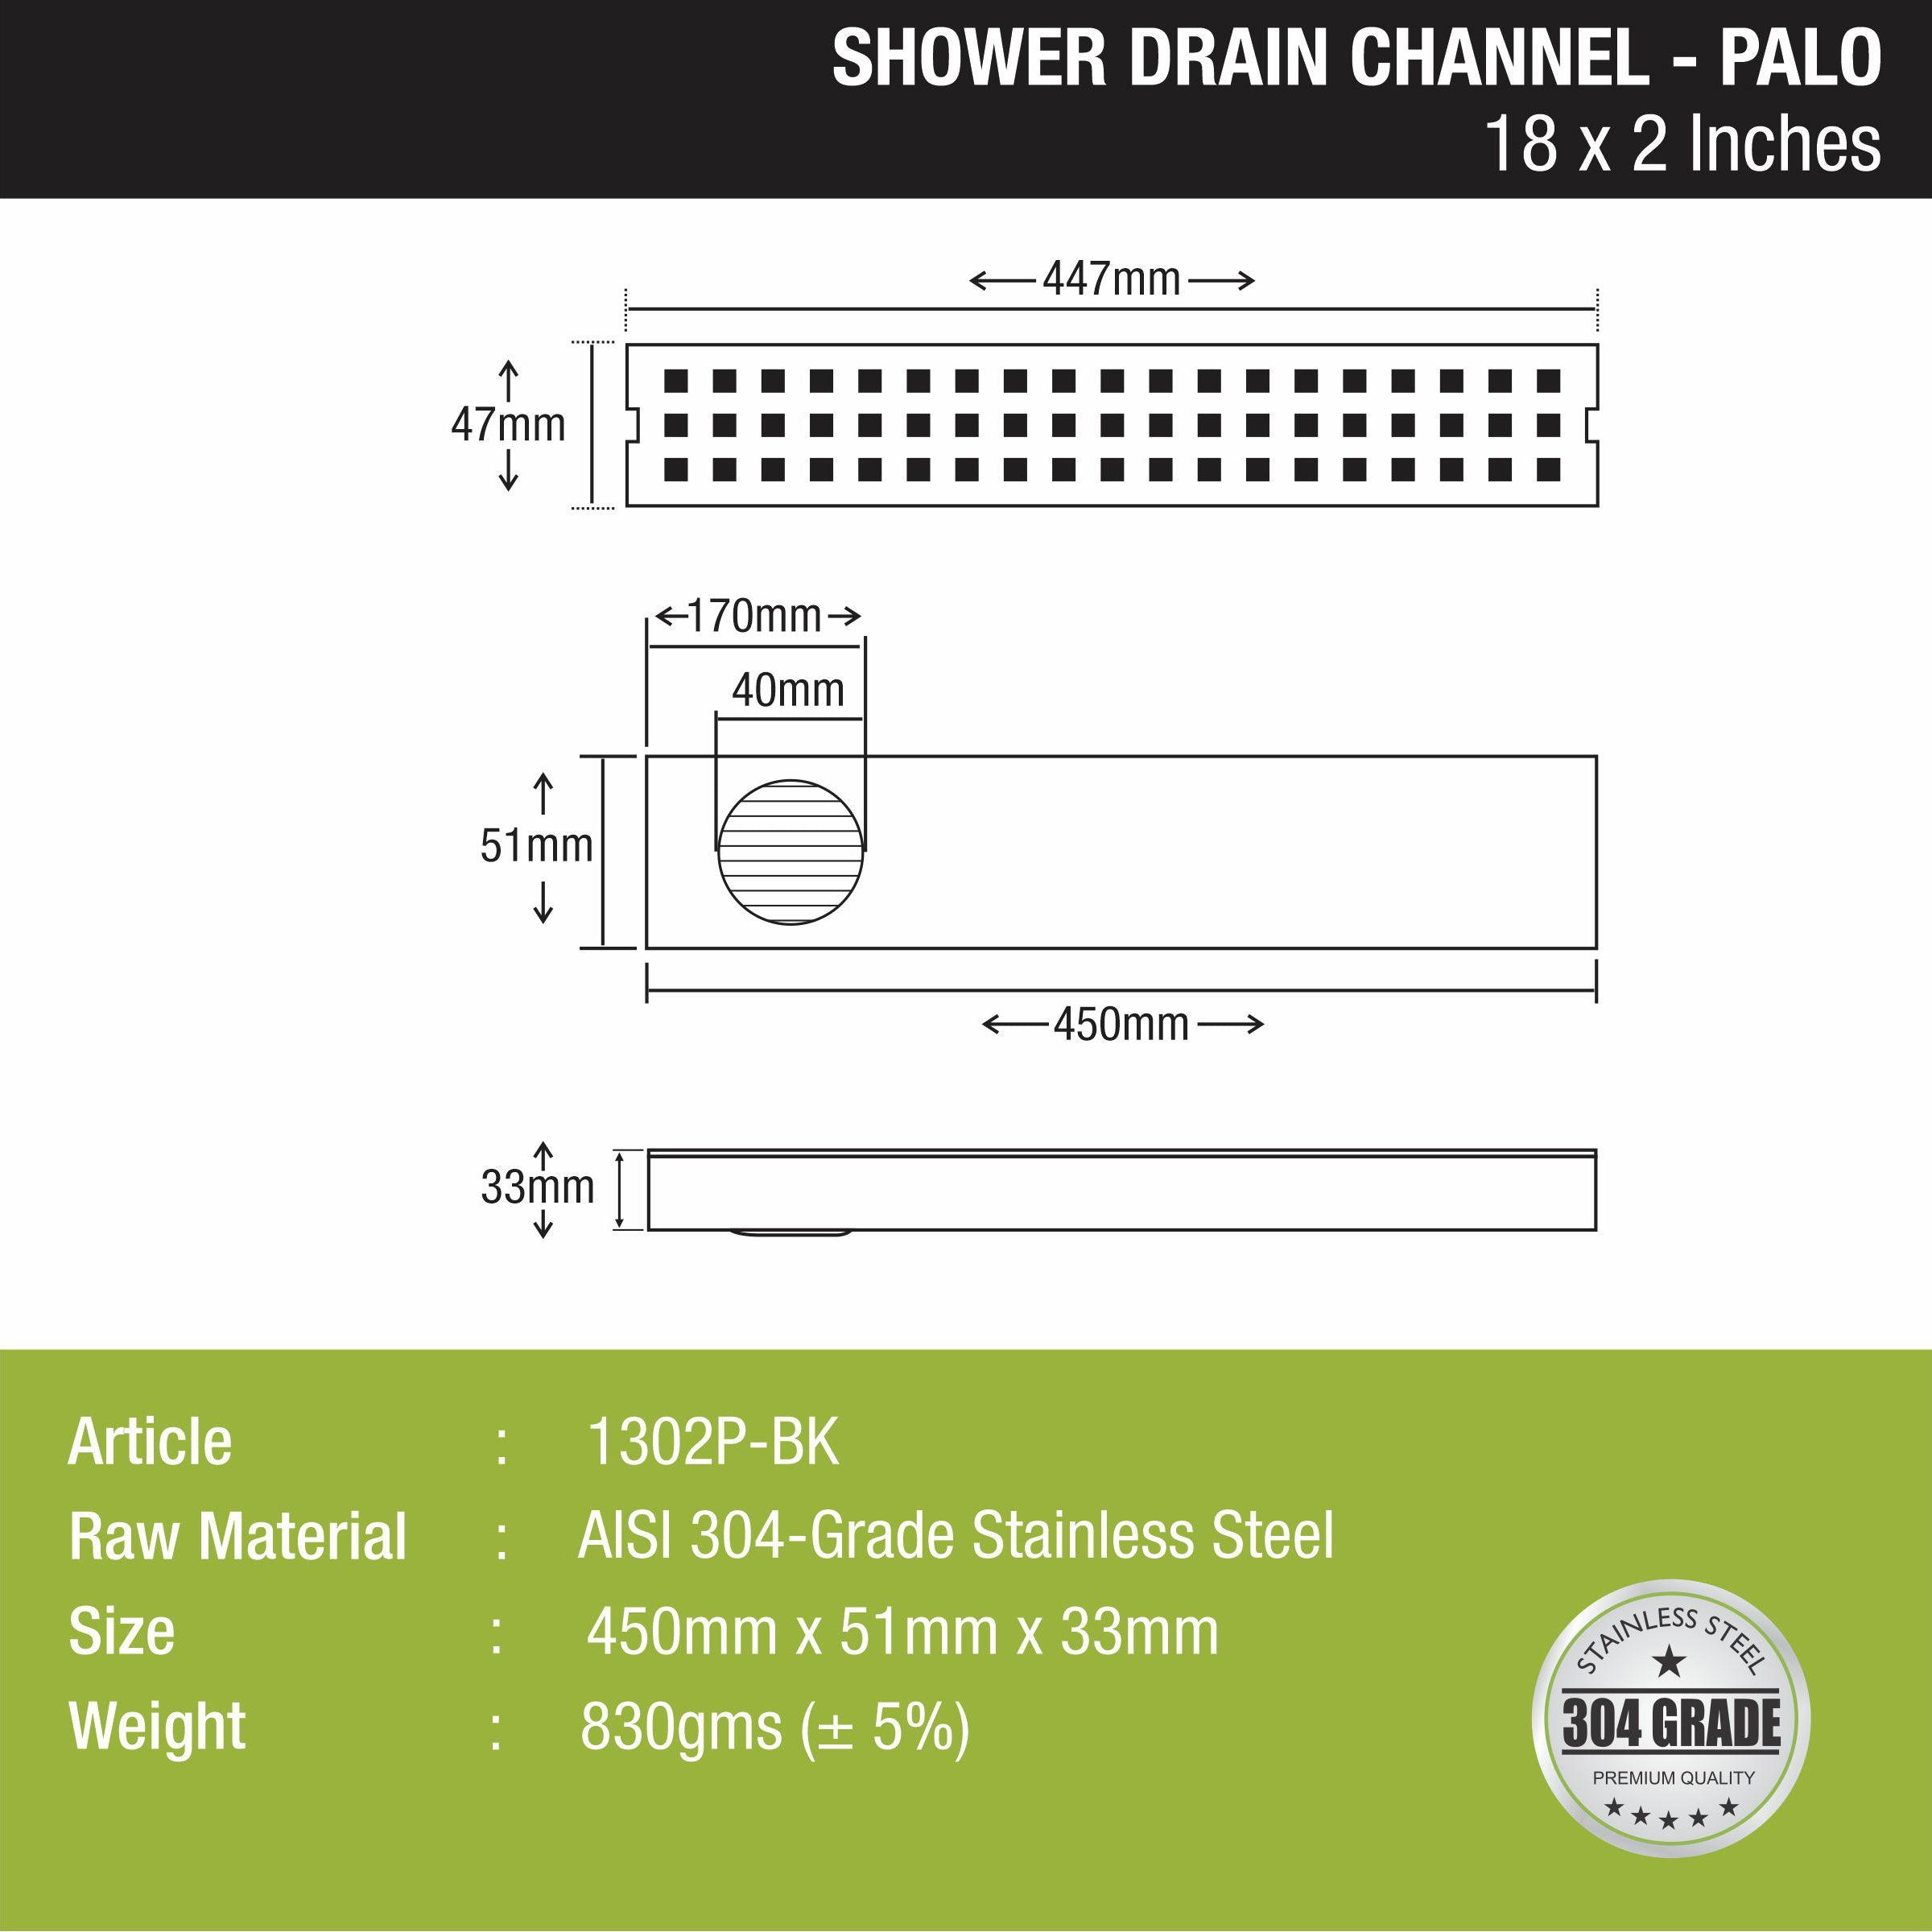 Palo Shower Drain Channel - Black (18 x 2 Inches) size and measurement